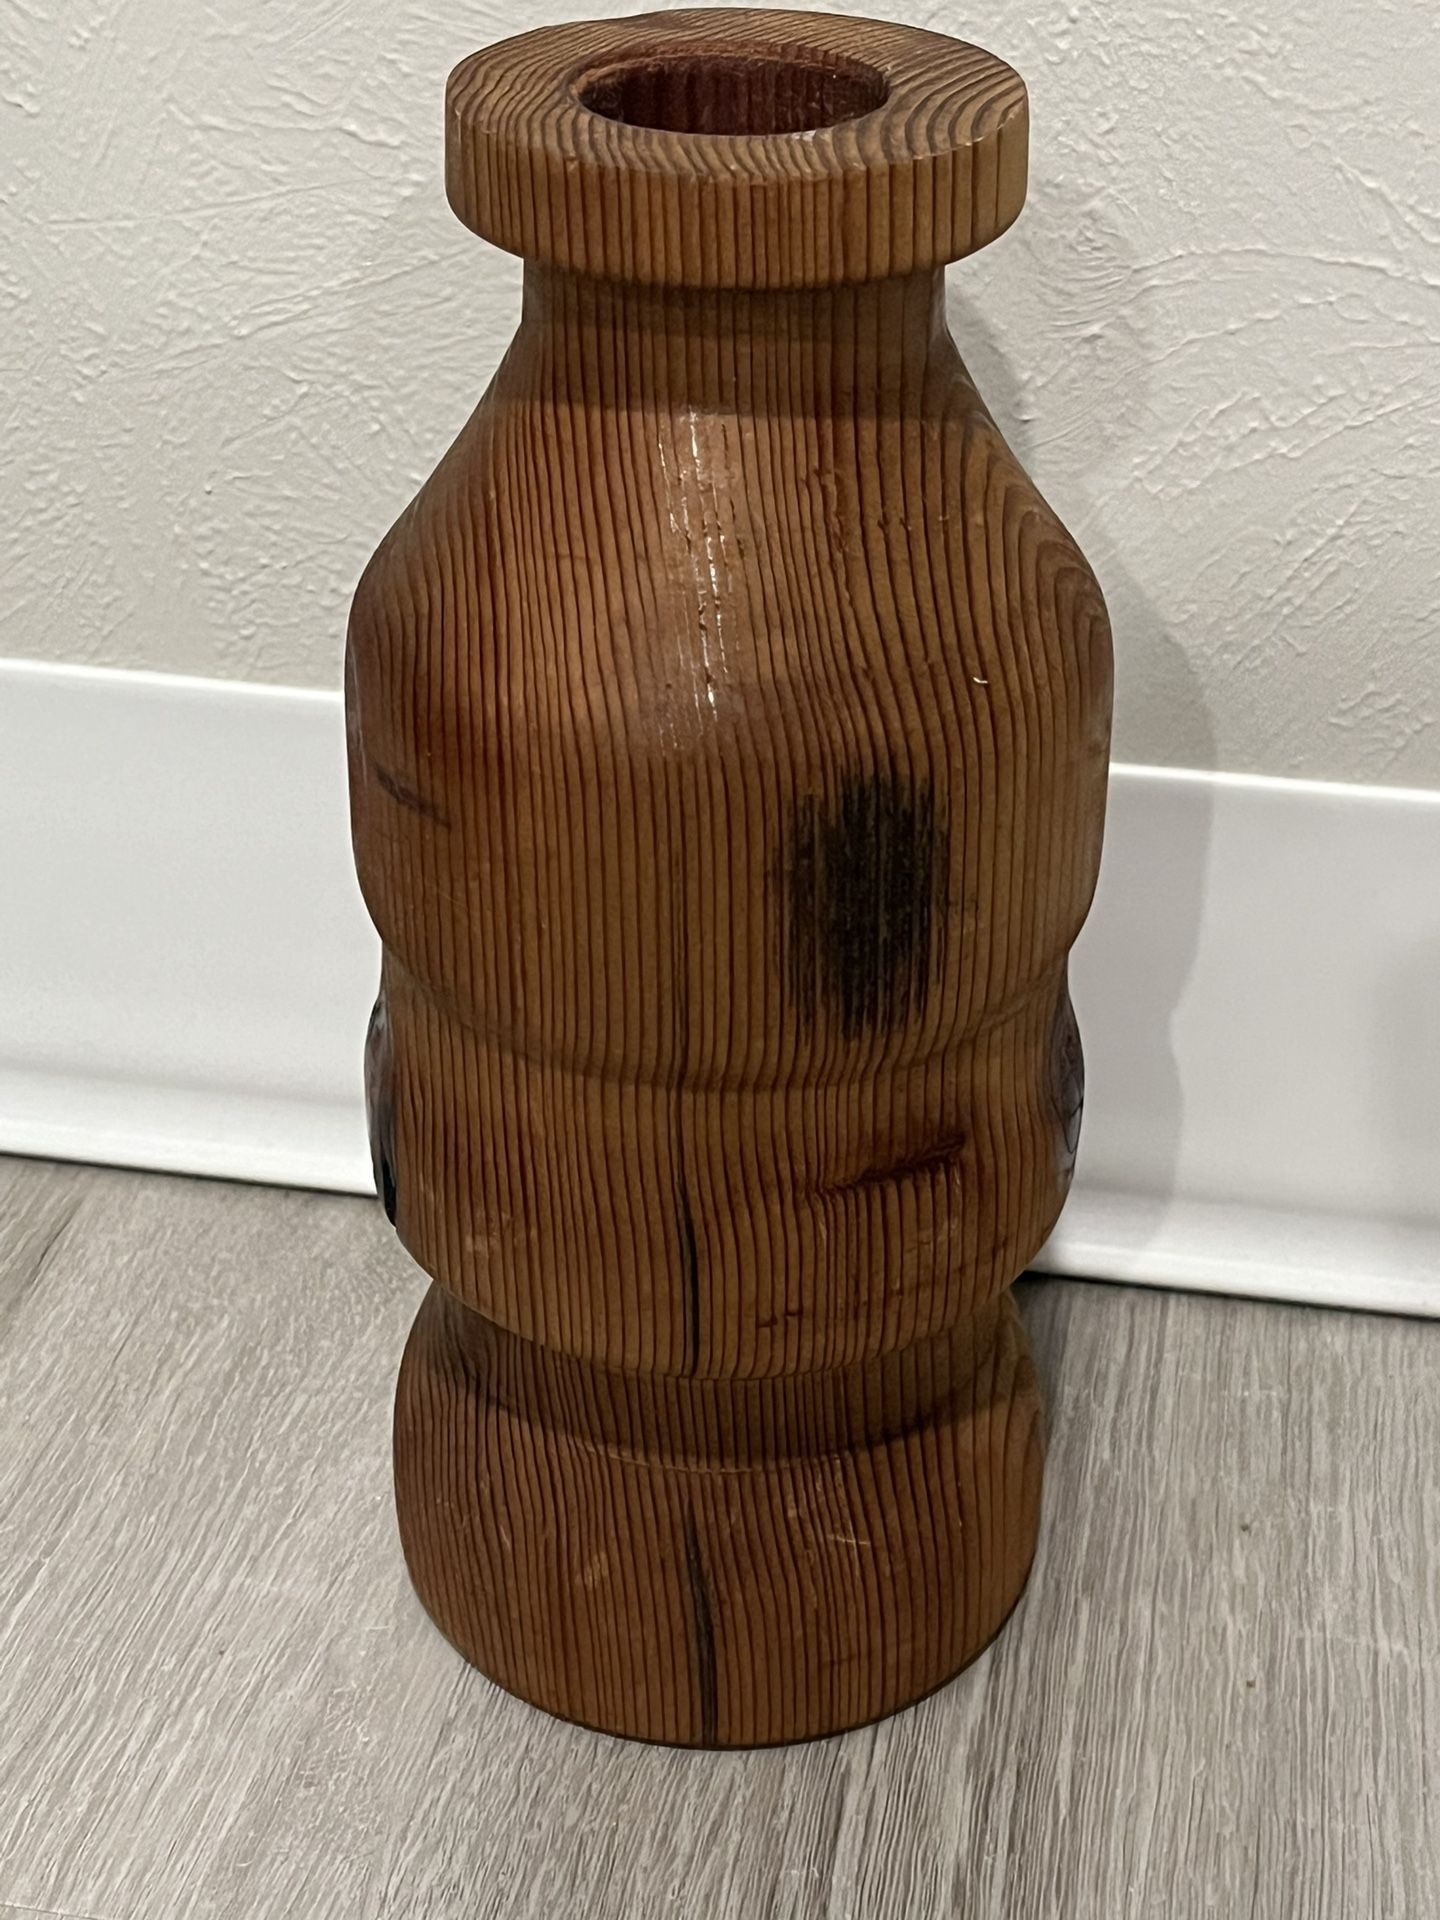 Wood Lathe Turned Made In Montana Candle Holder